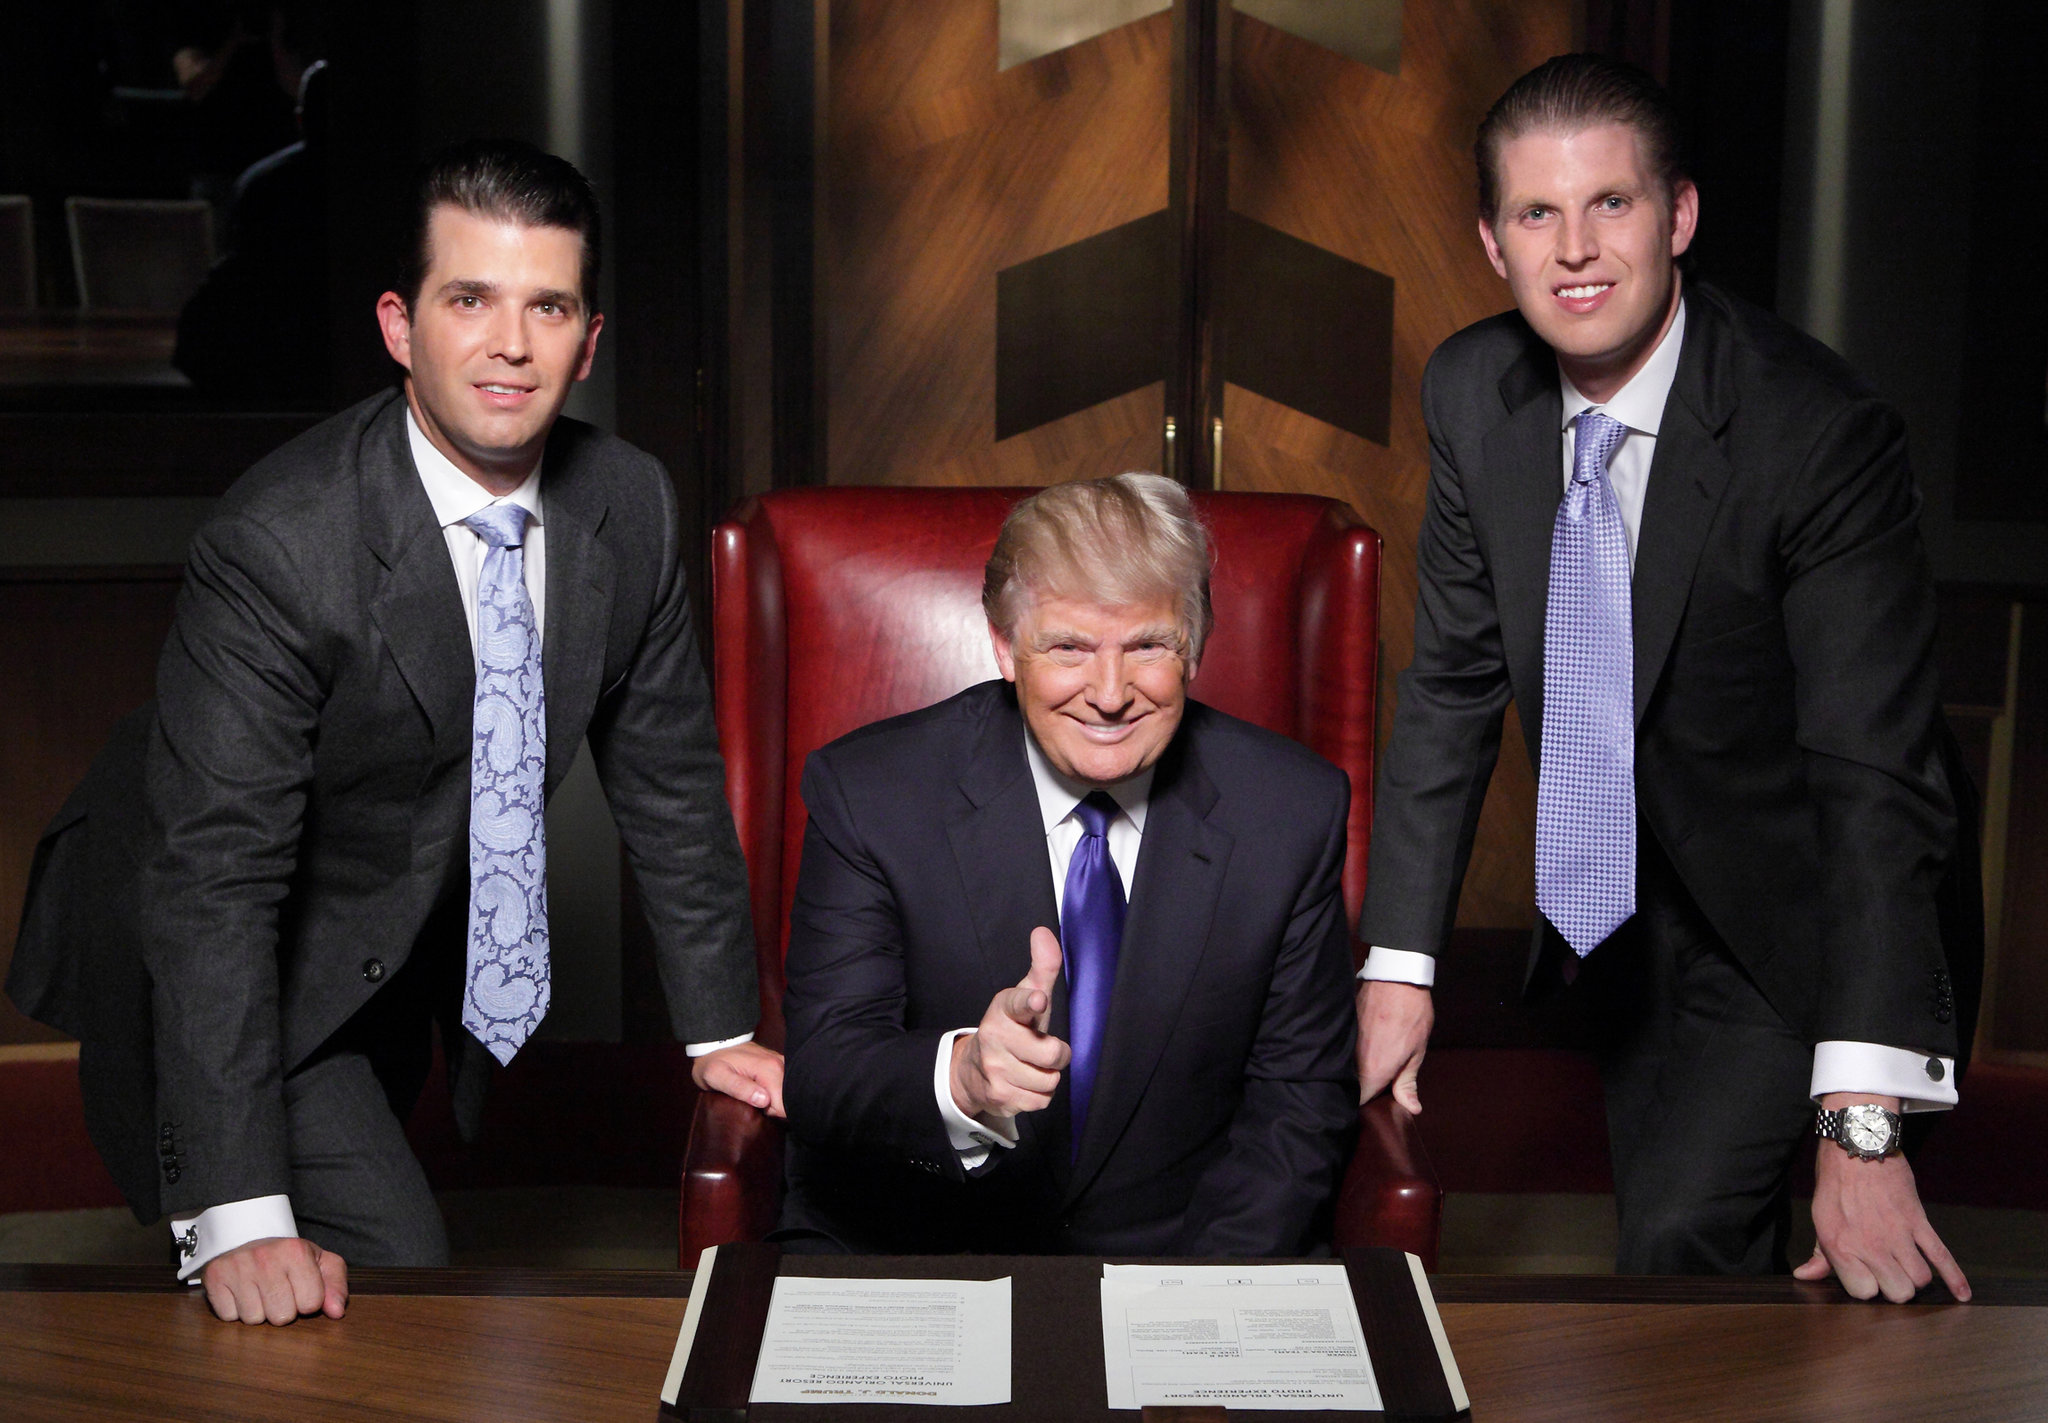 Dive into the riveting world of the 'Donald Trump Apprentice' era. This Cannes-potential documentary could spill the tea on reality TV's cut-throat politics. Buckle up for a Trumpian joyride!